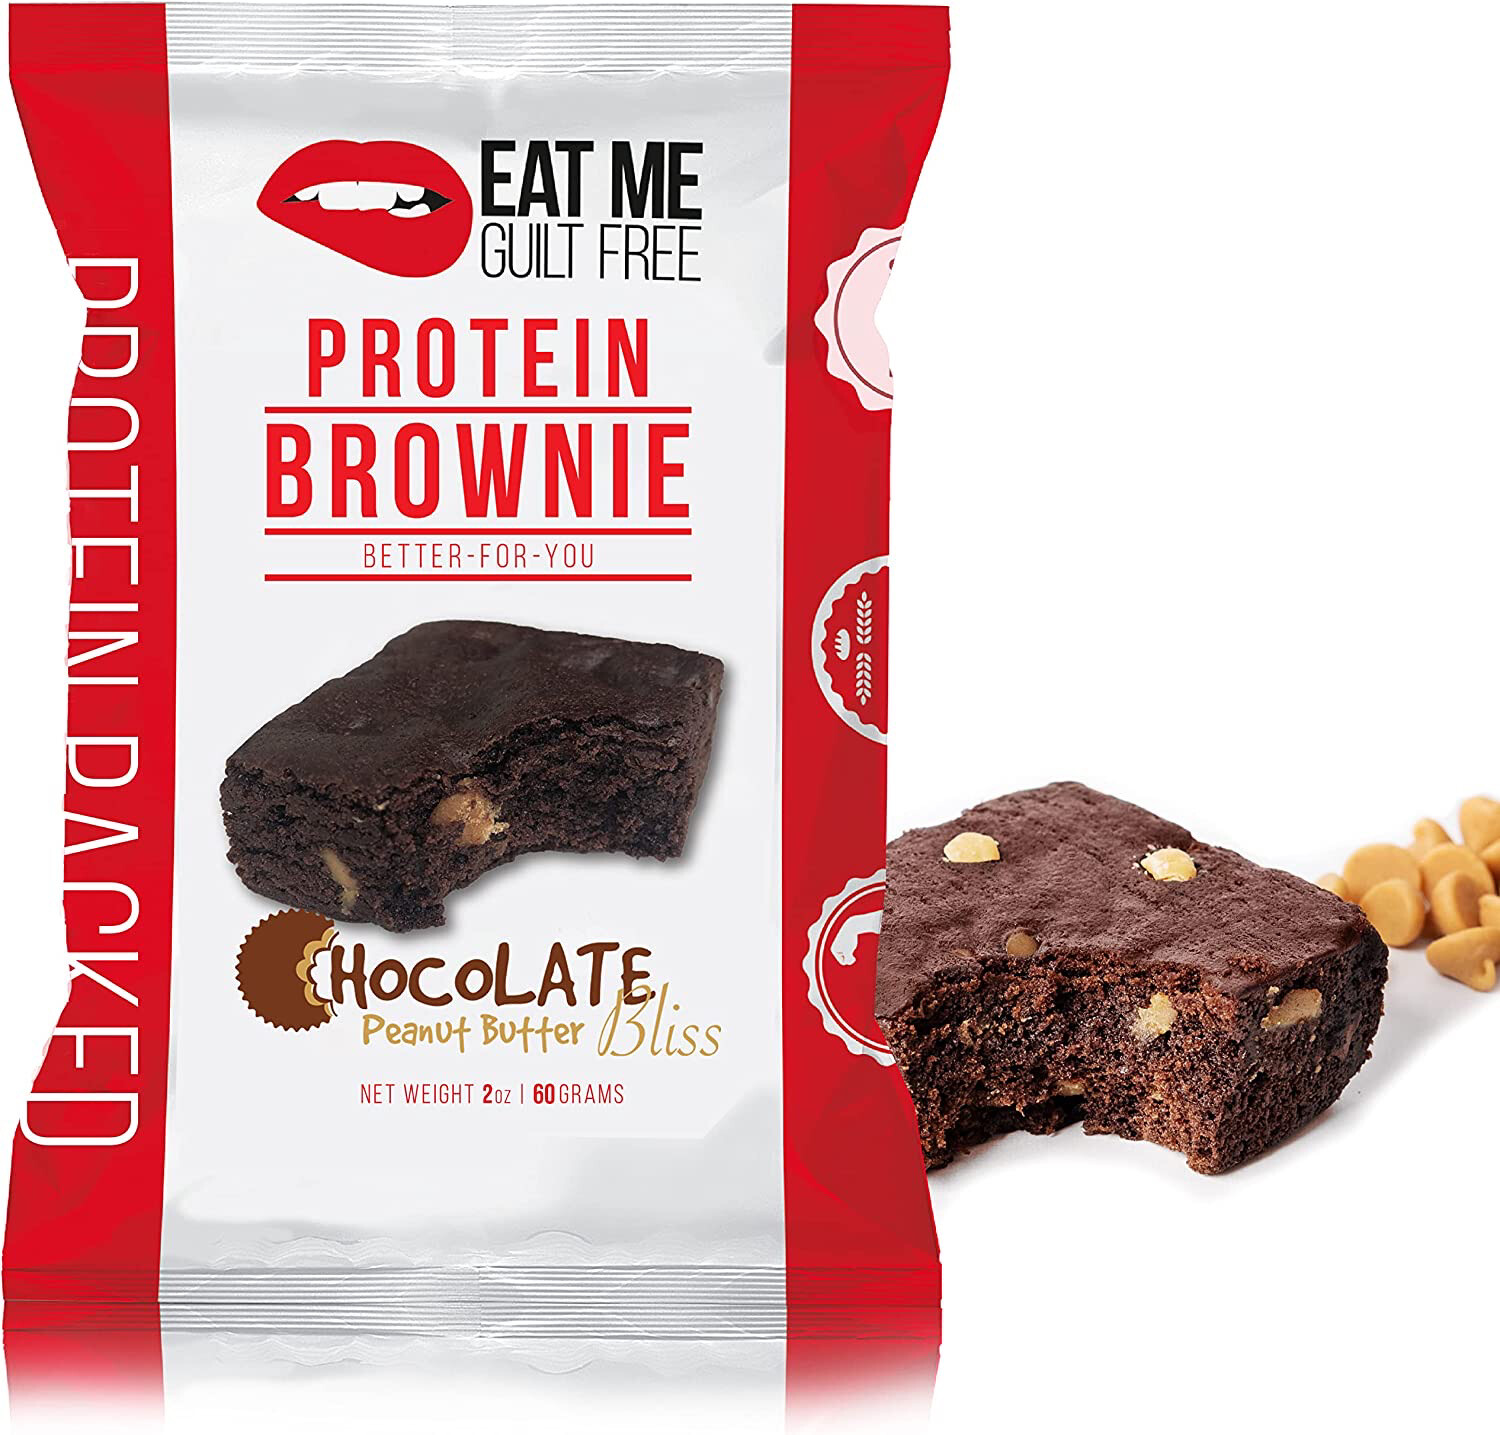 Eat me Guilt Free Chocolate Peanut Butter Bliss Protein Brownie 14 g PRO